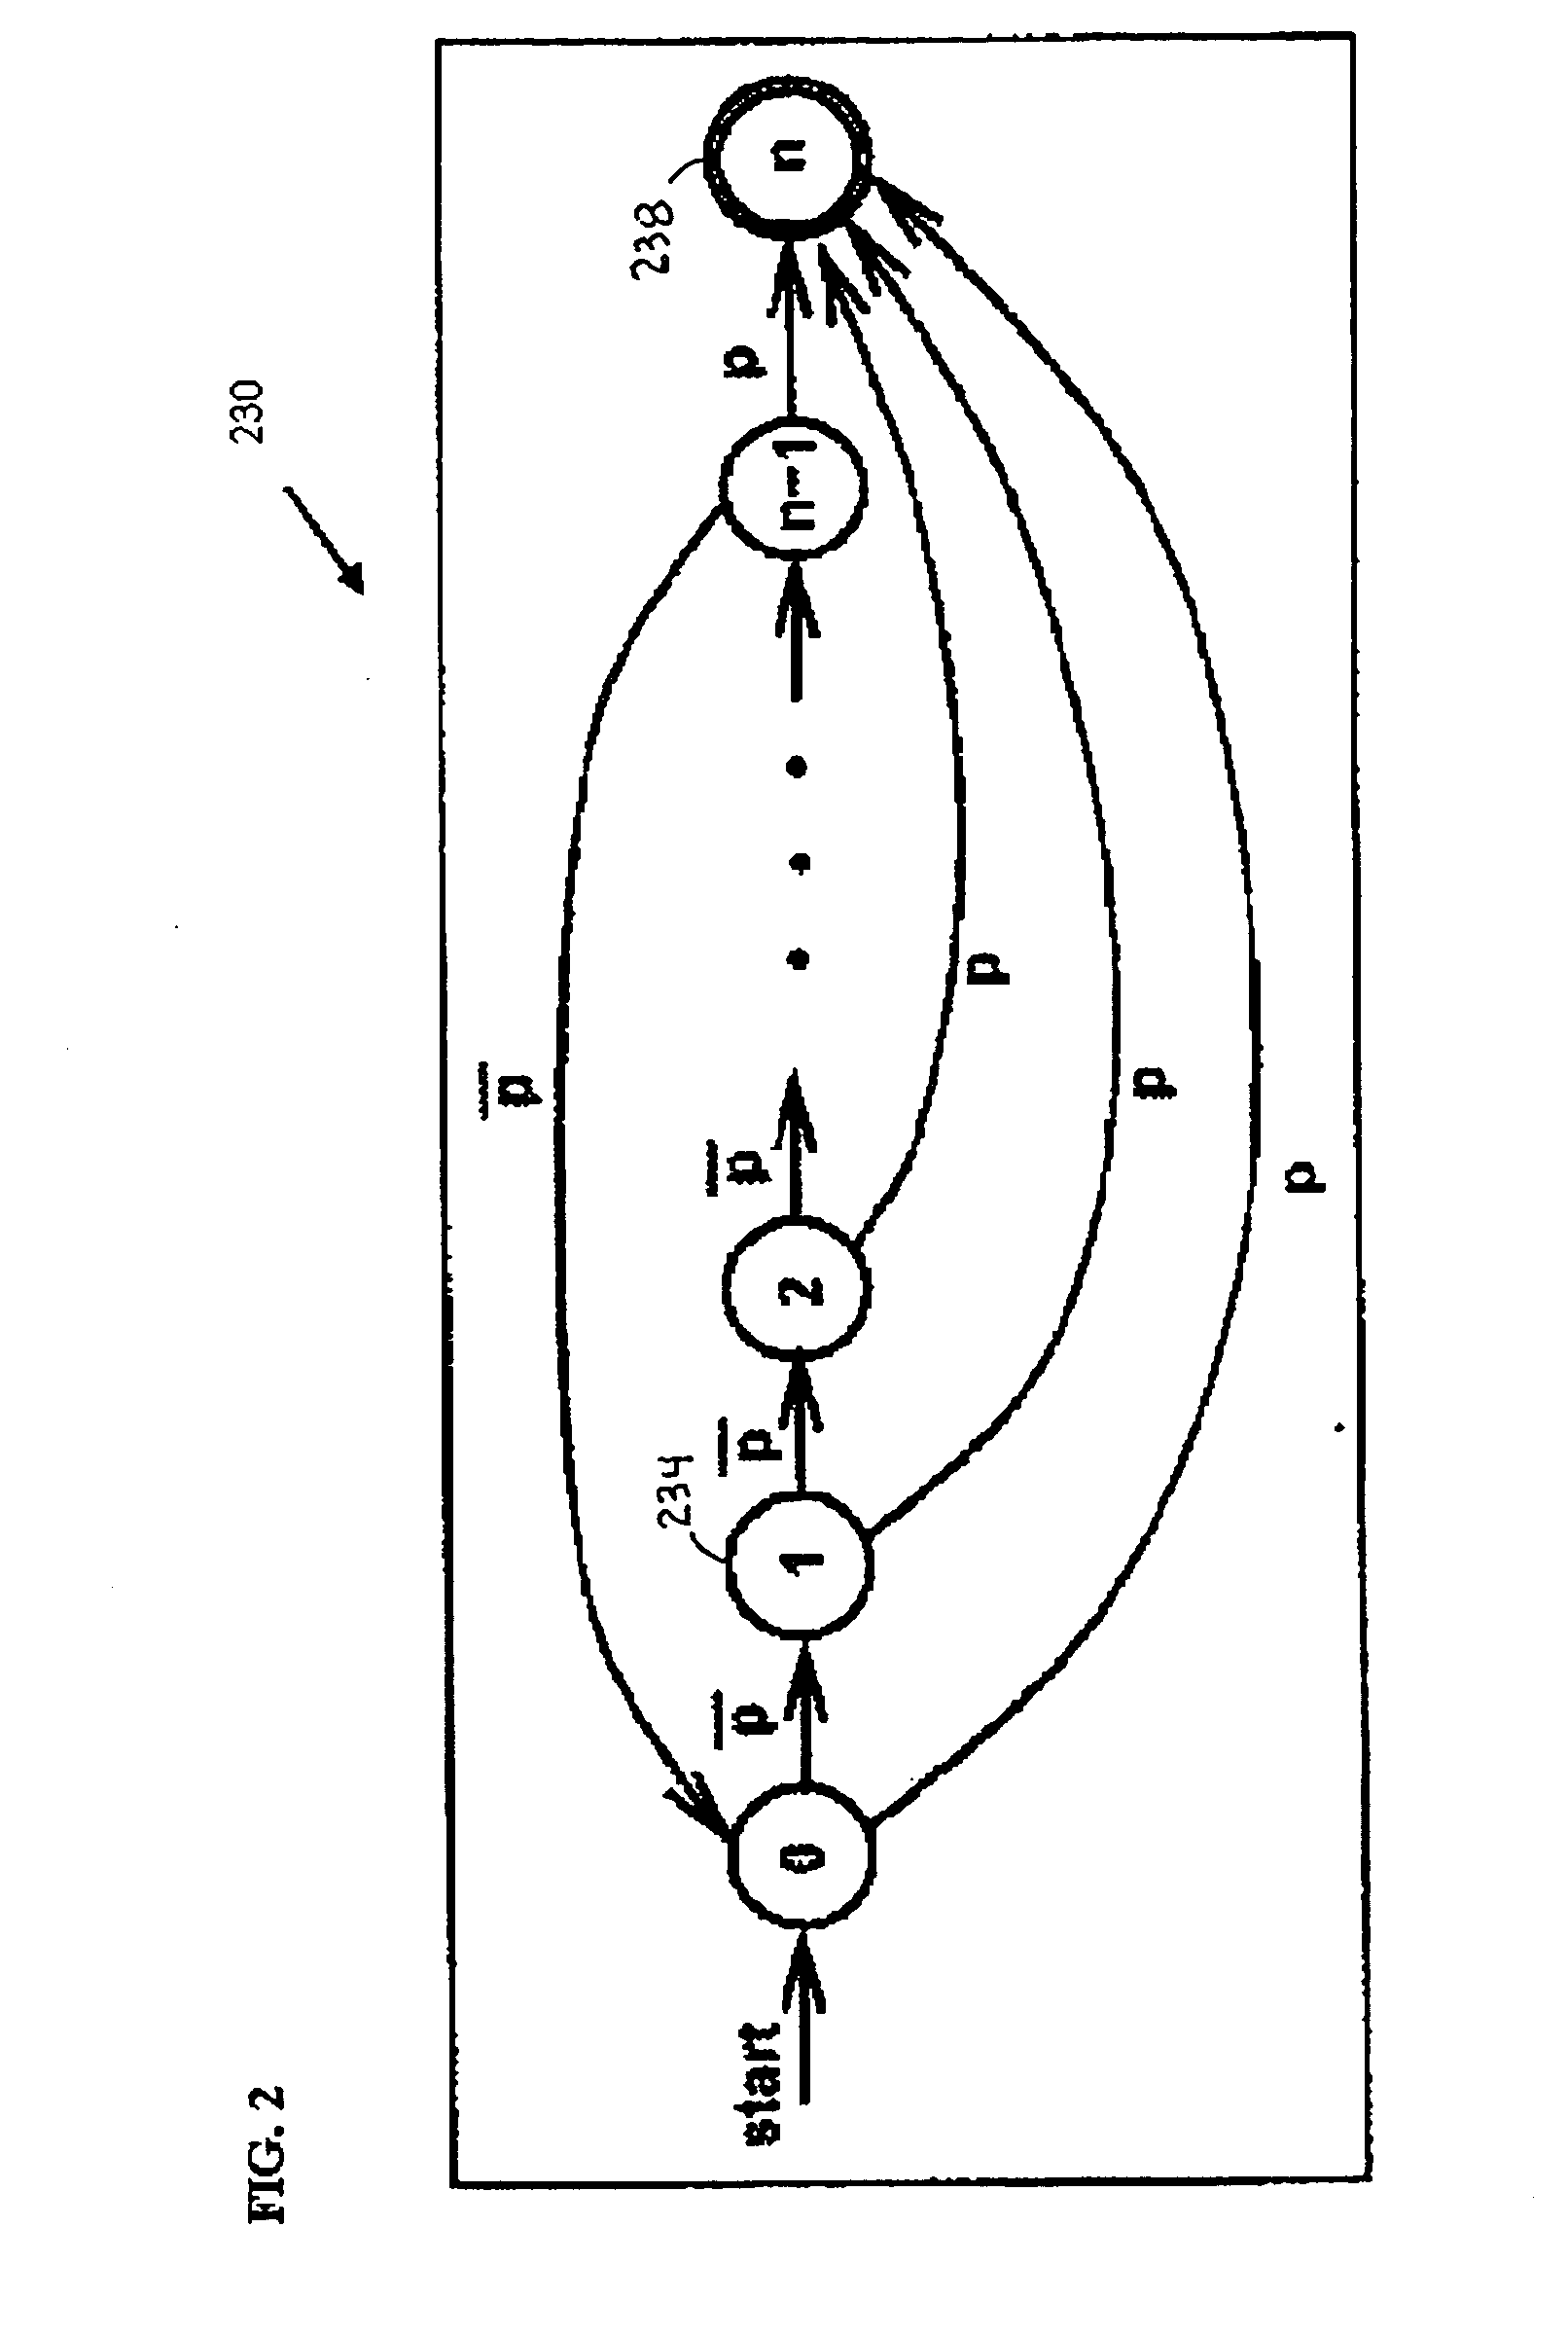 Circuit modeling apparatus, systems, and methods